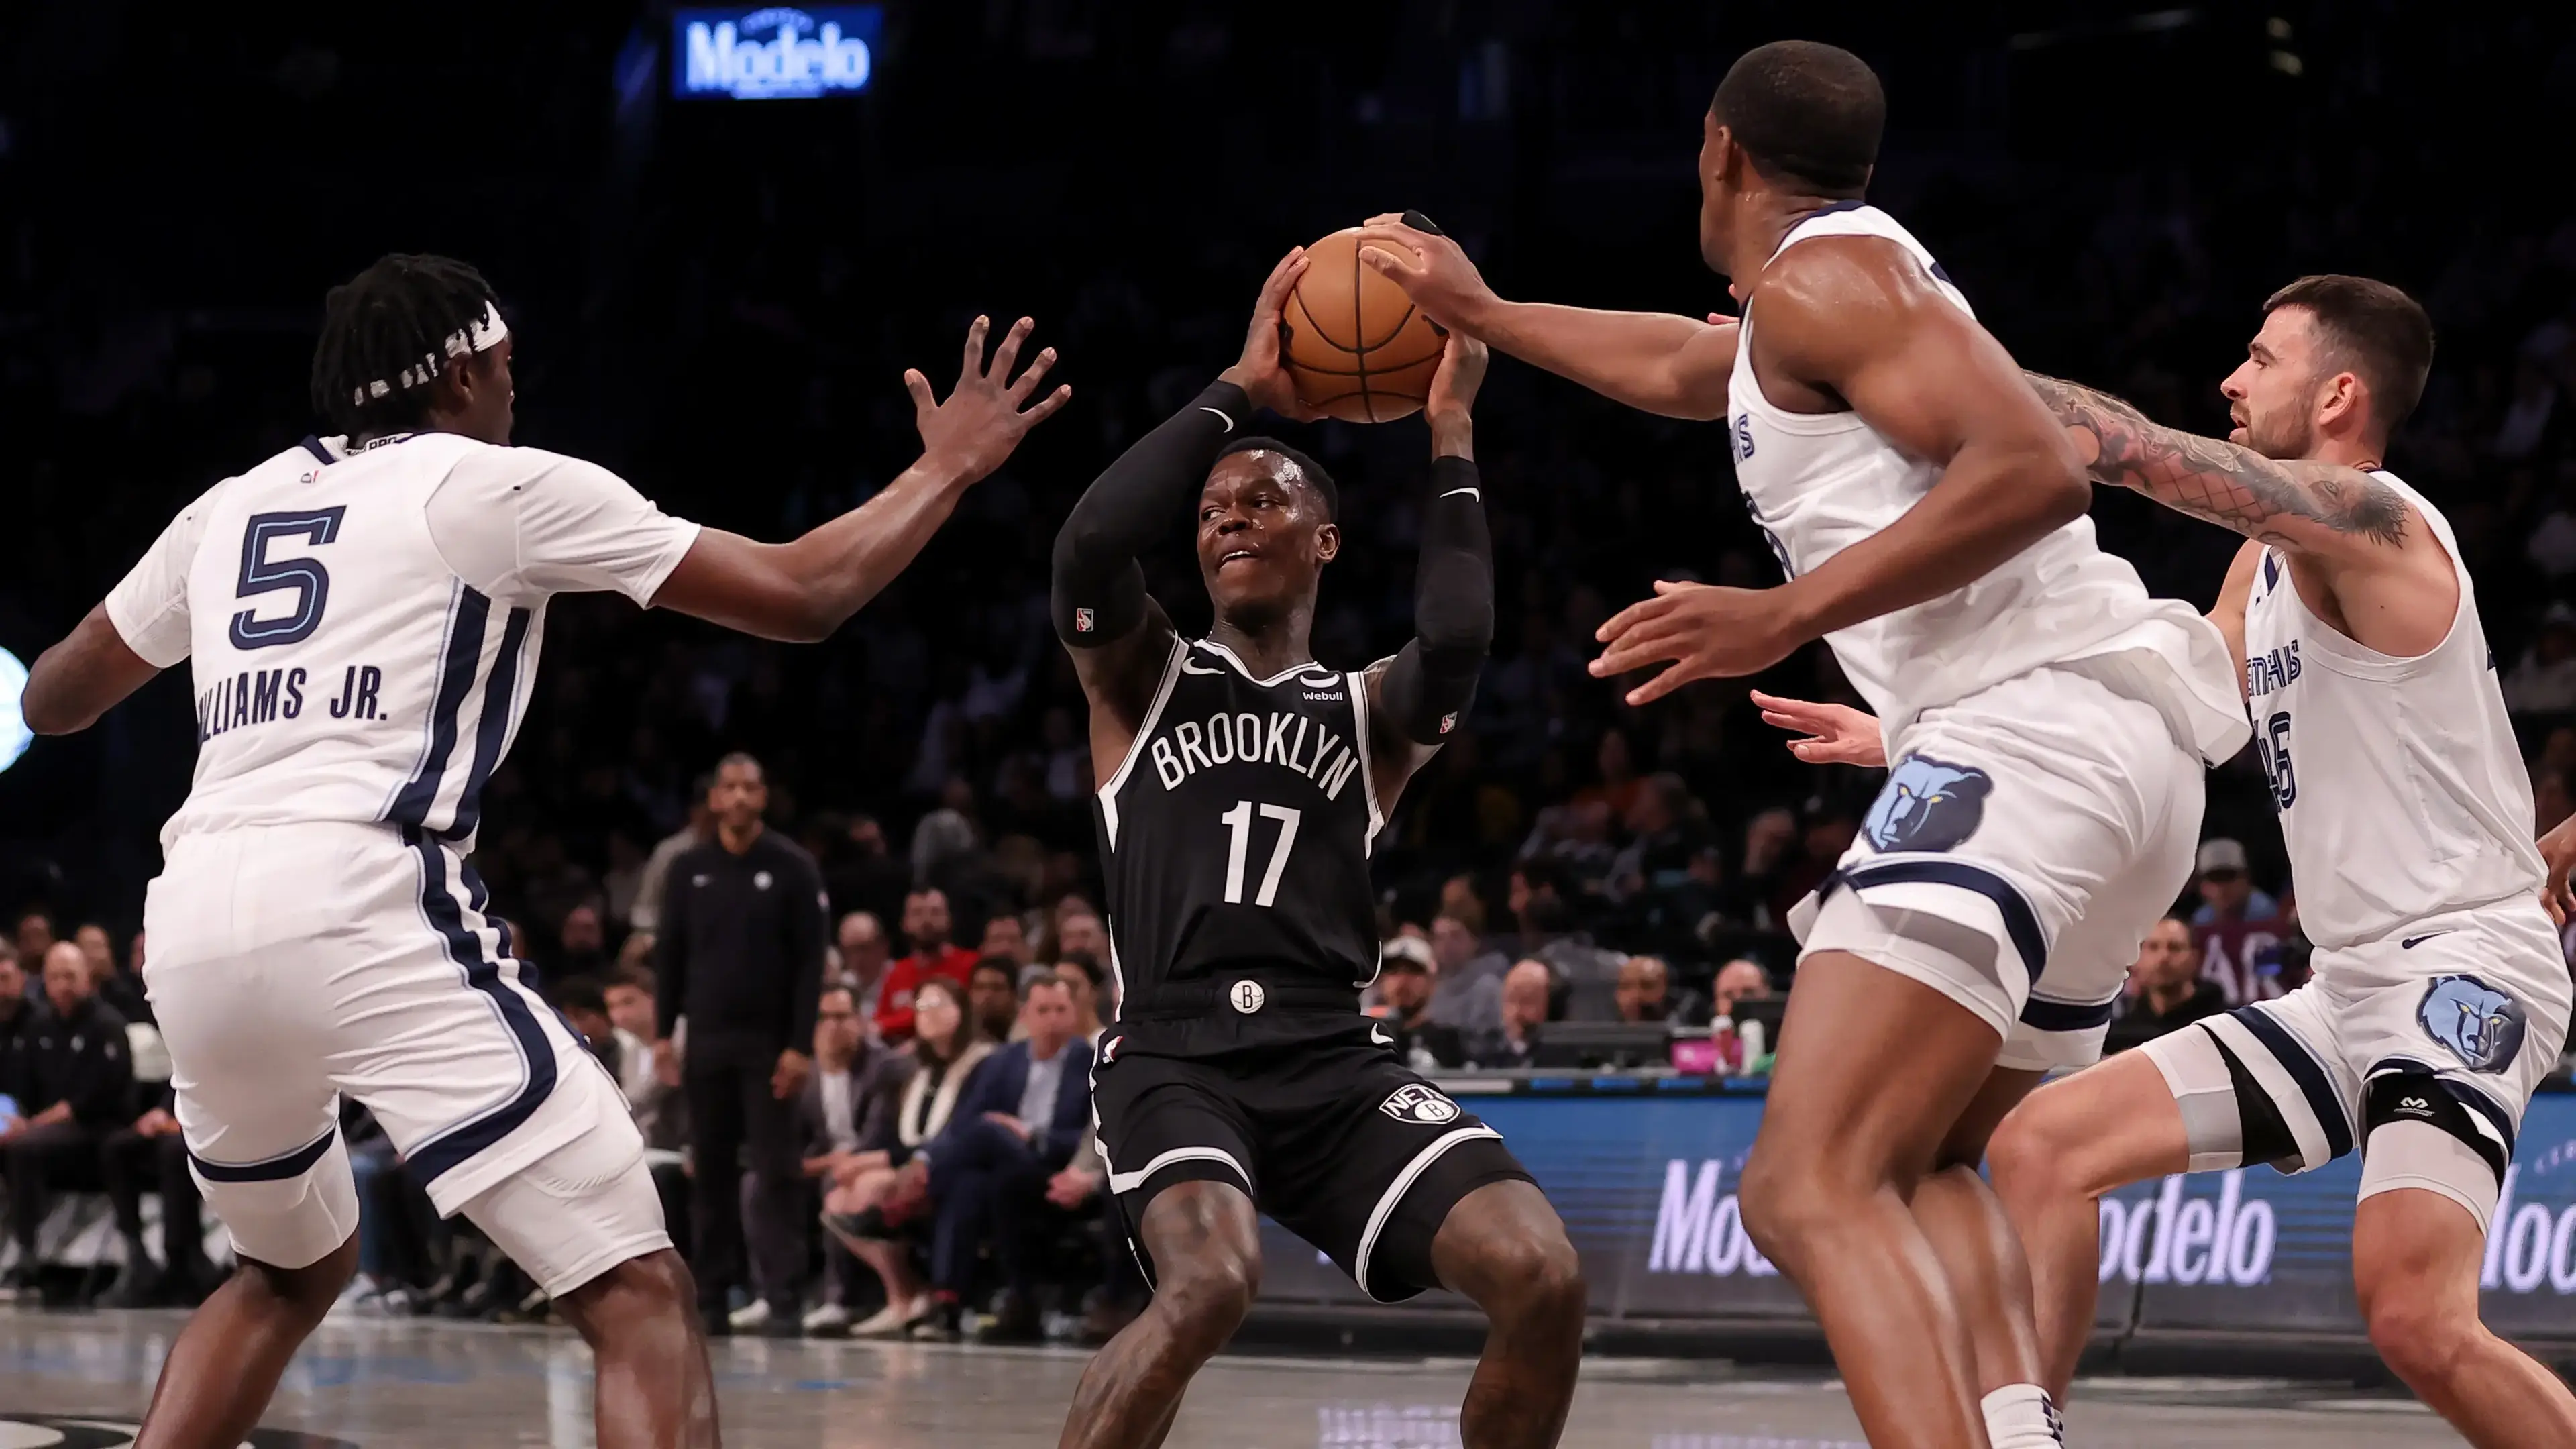 Brooklyn Nets guard Dennis Schroder (17) looks to pass the ball against Memphis Grizzlies guard Vince Williams Jr. (5) and center Trey Jemison (55) and guard John Konchar (46) during the first quarter at Barclays Center / Brad Penner - USA TODAY Sports